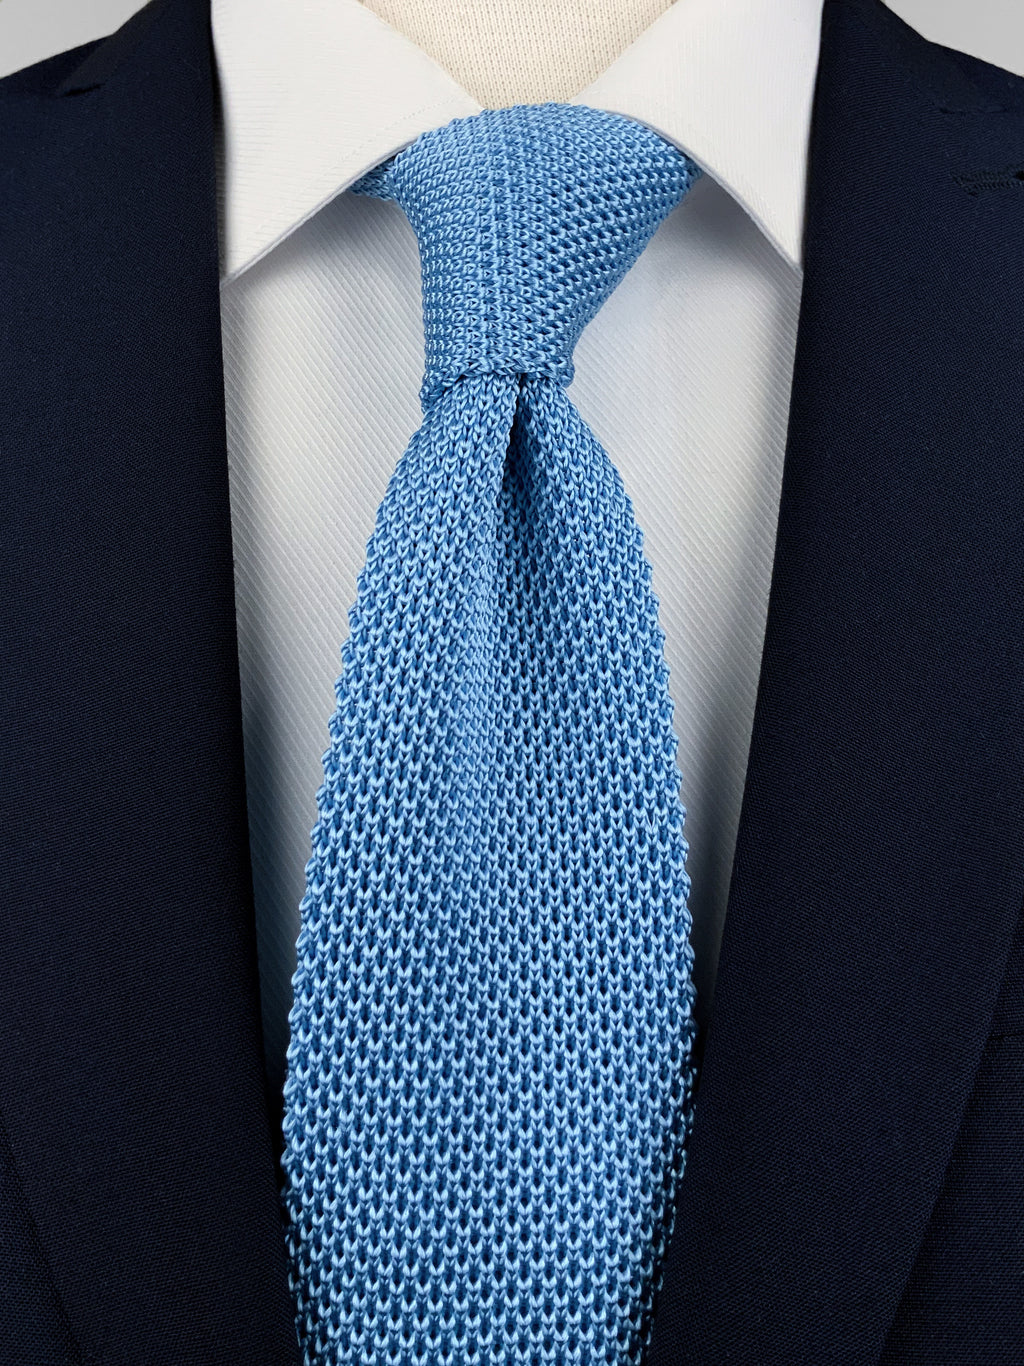 Sky blue mulberry silk knitted tie worn with a white shirt and a navy blue suit